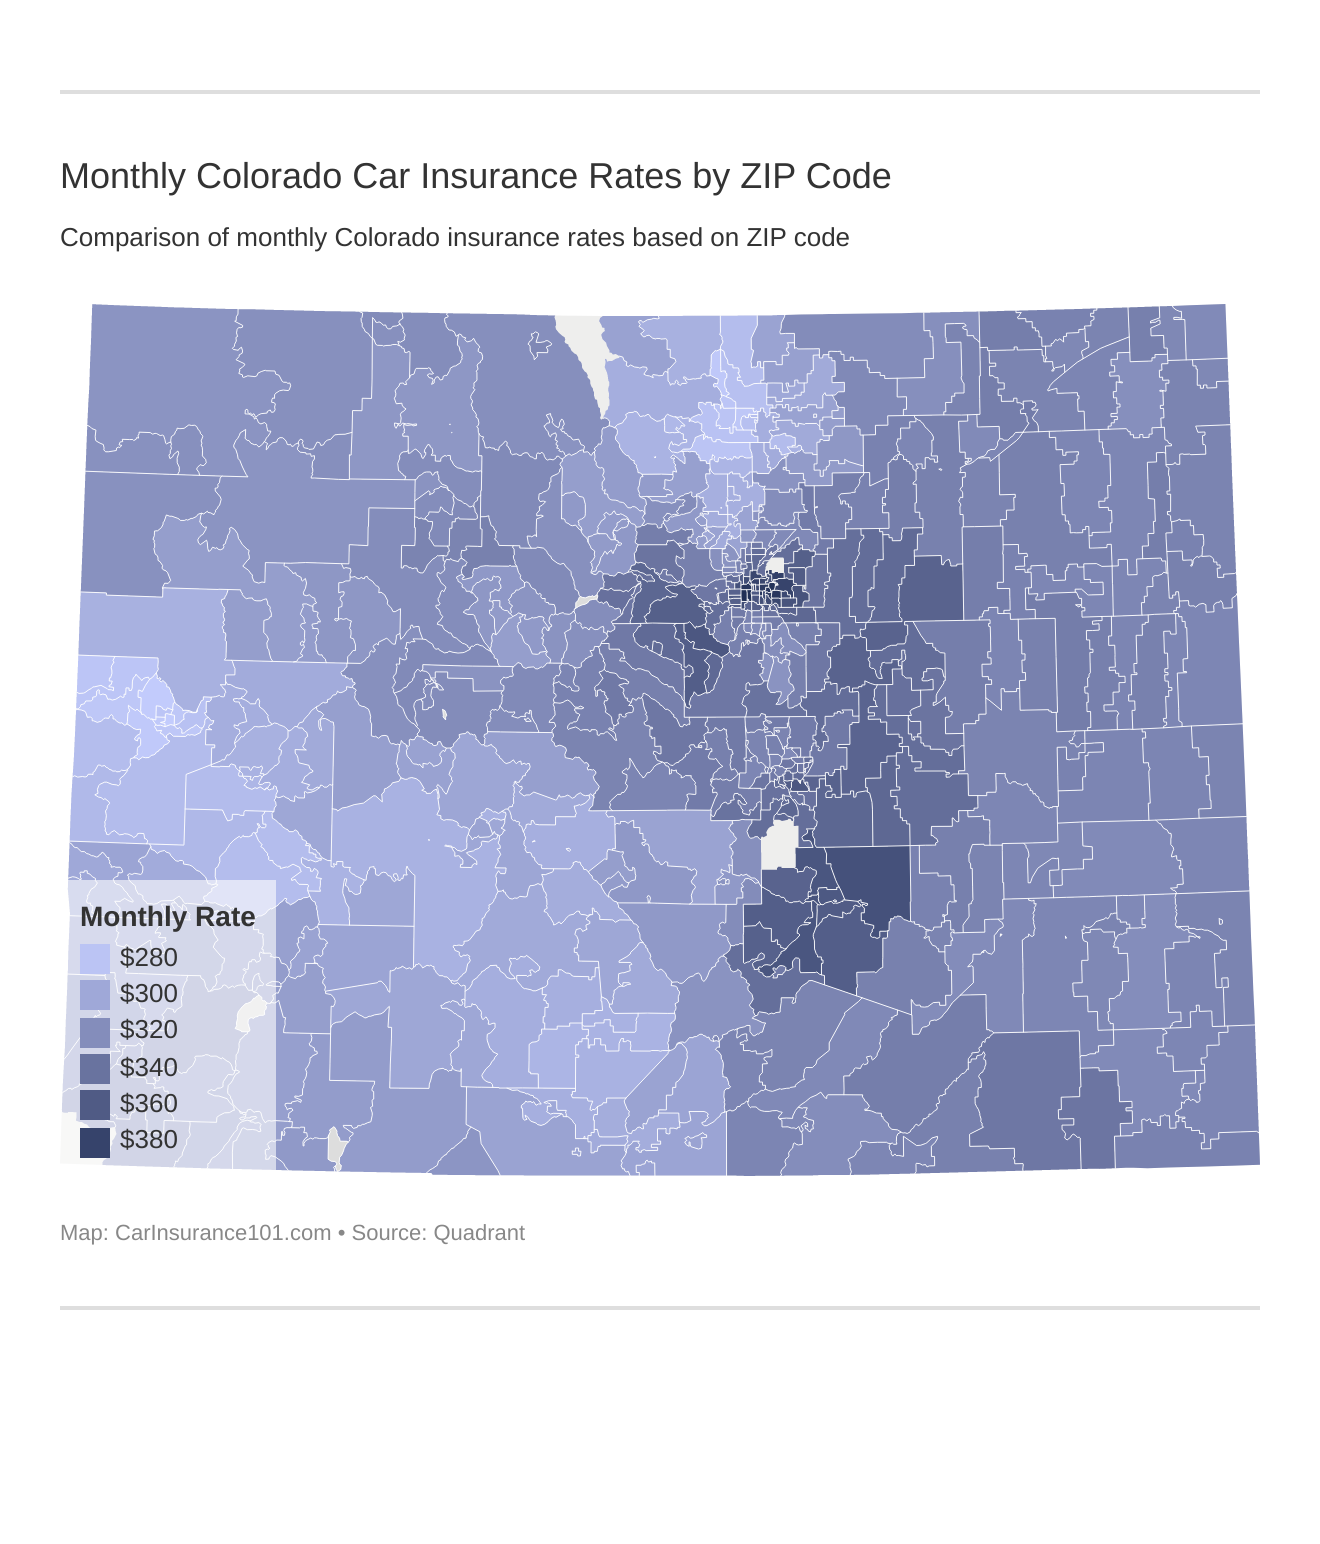 Monthly Colorado Car Insurance Rates by ZIP Code